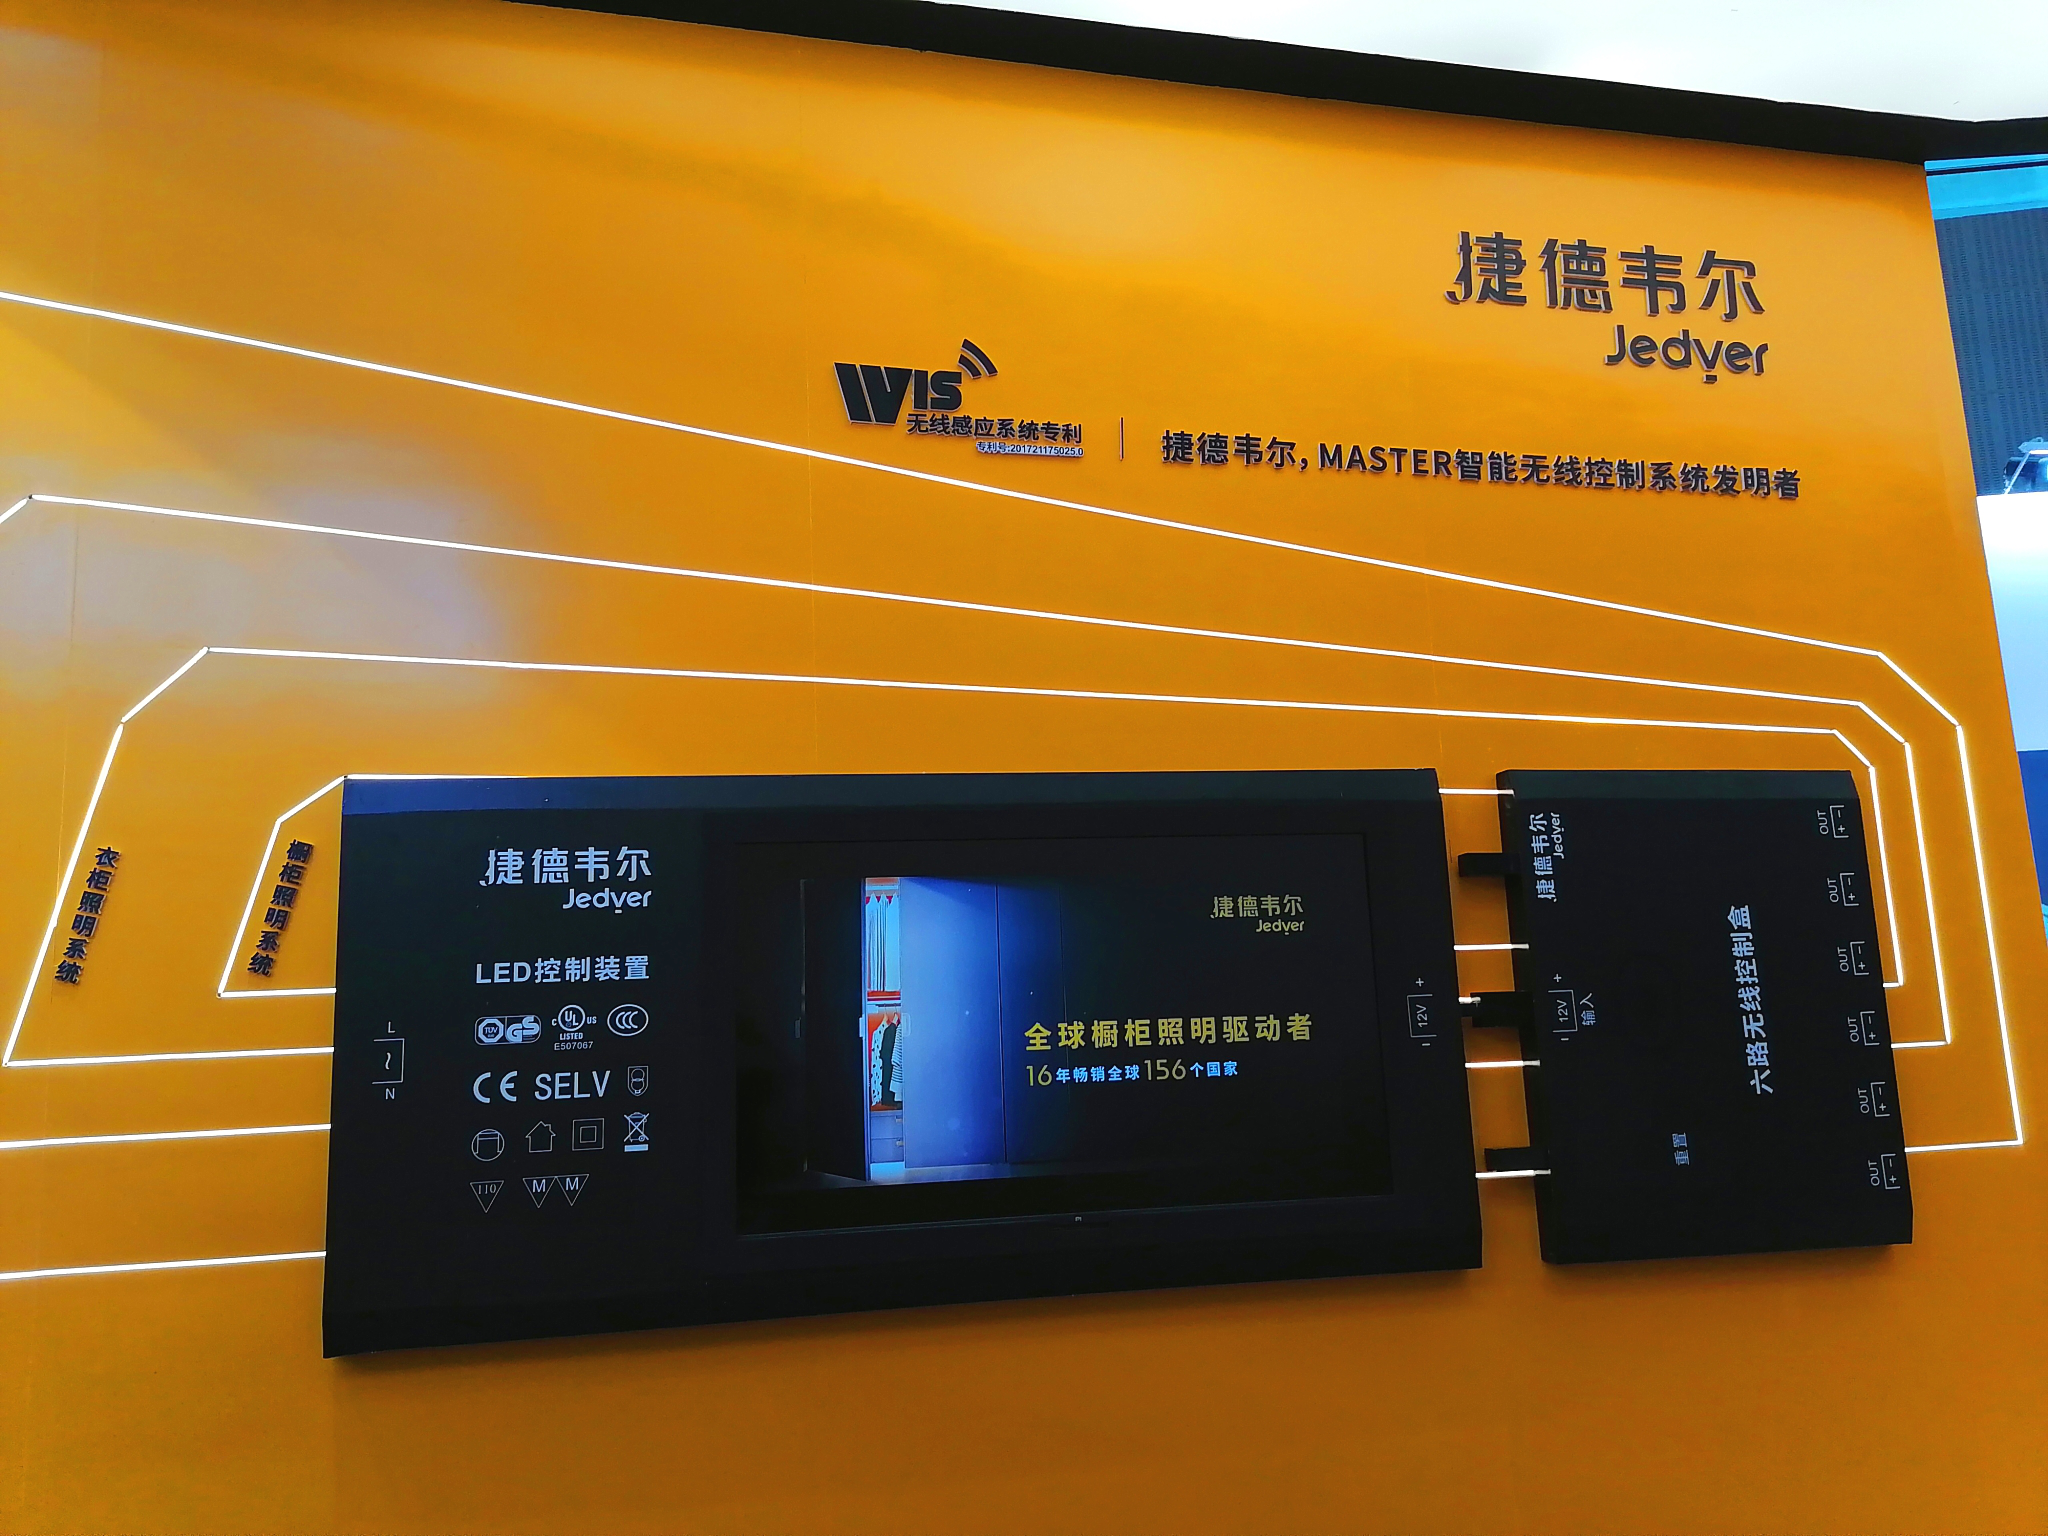 The cabinet lighting wireless intelligent control system was unveiled at the China Construction Expo, and Jedver took the lead (Figure 6)